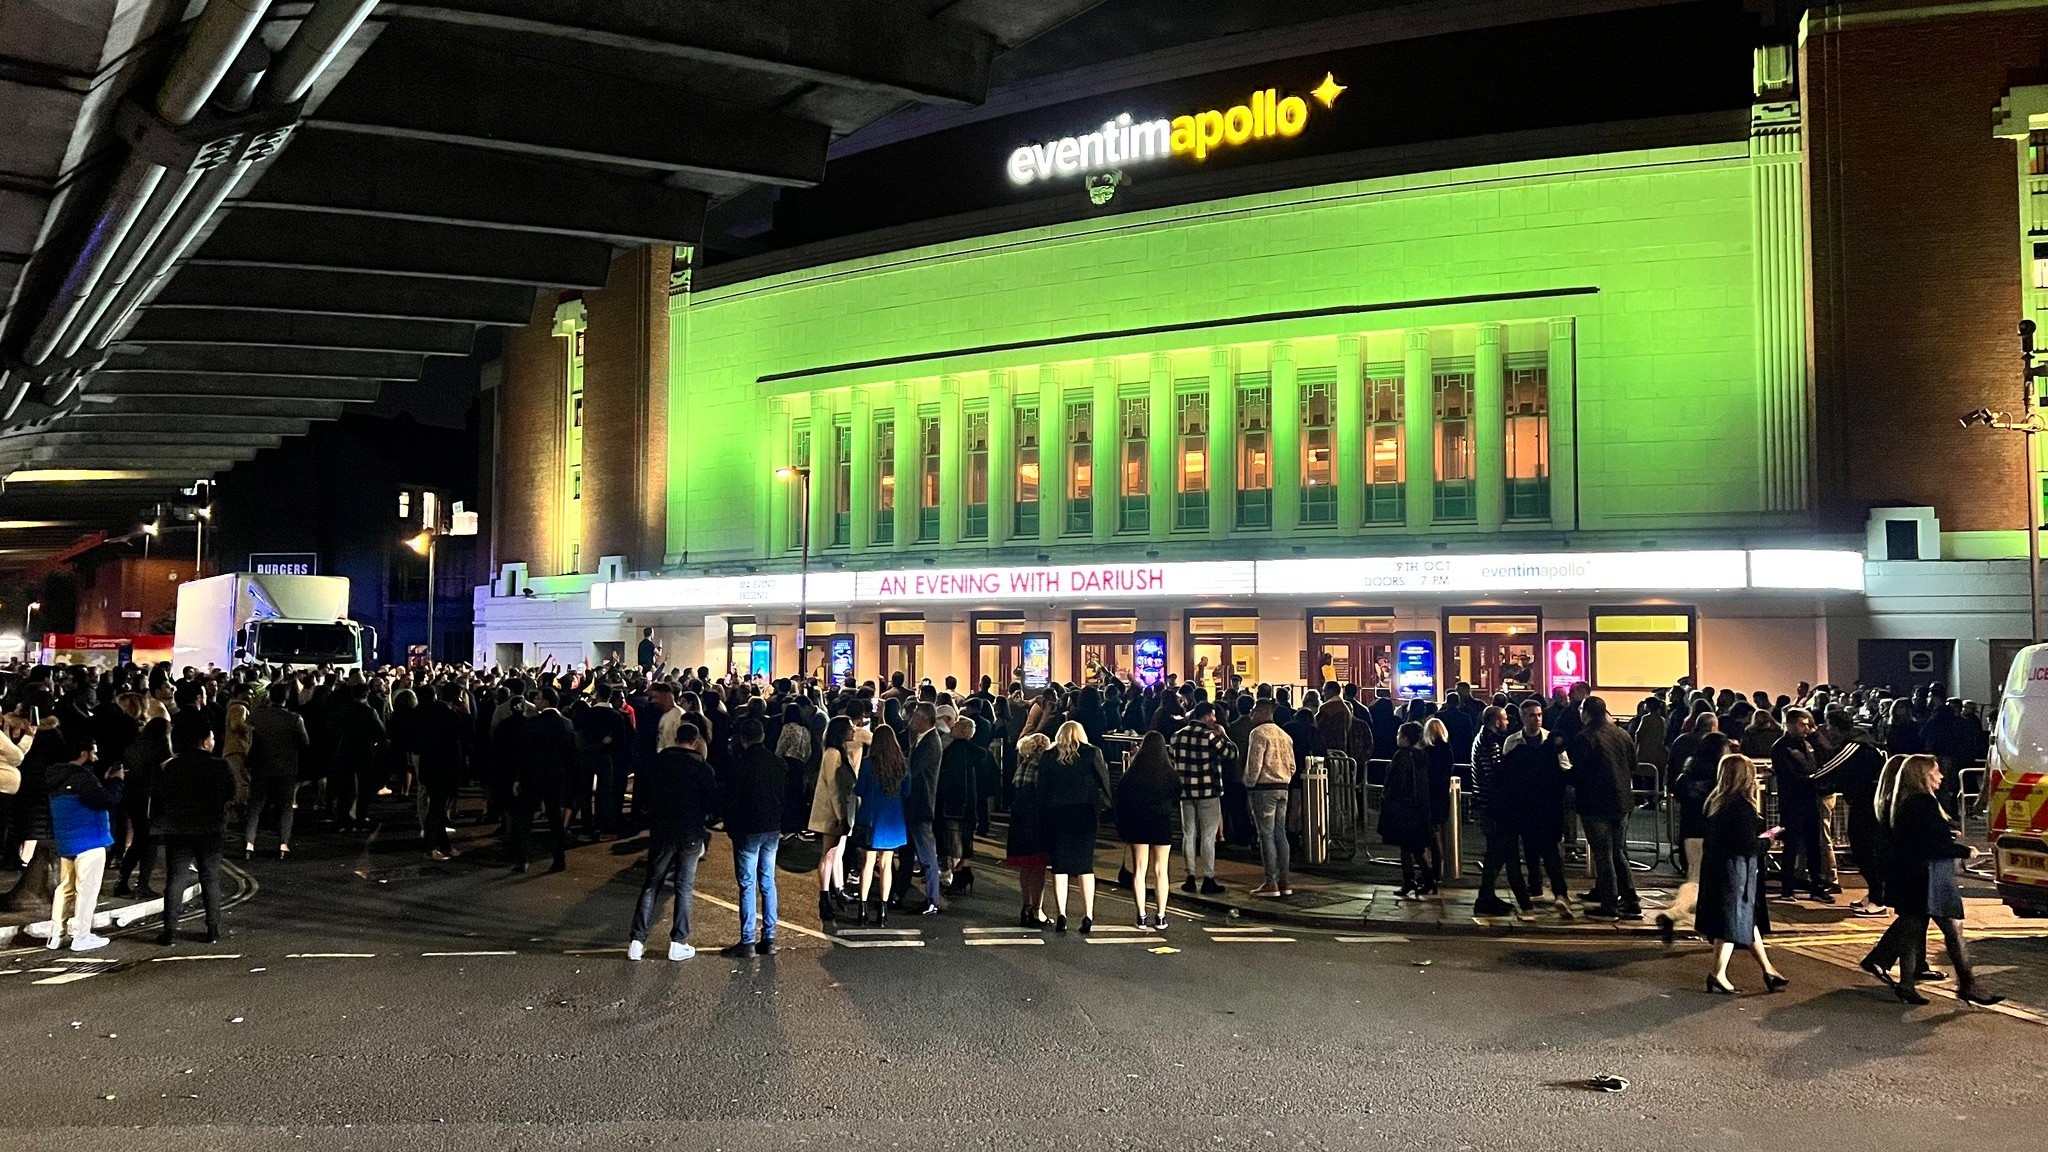 People gather outside the Eventim Apollo in Hammersmith, west London, after singer Dariush Eghbali's concert was evacuated on 9 October 2021 (Twitter/Mahdi Taghizadeh)